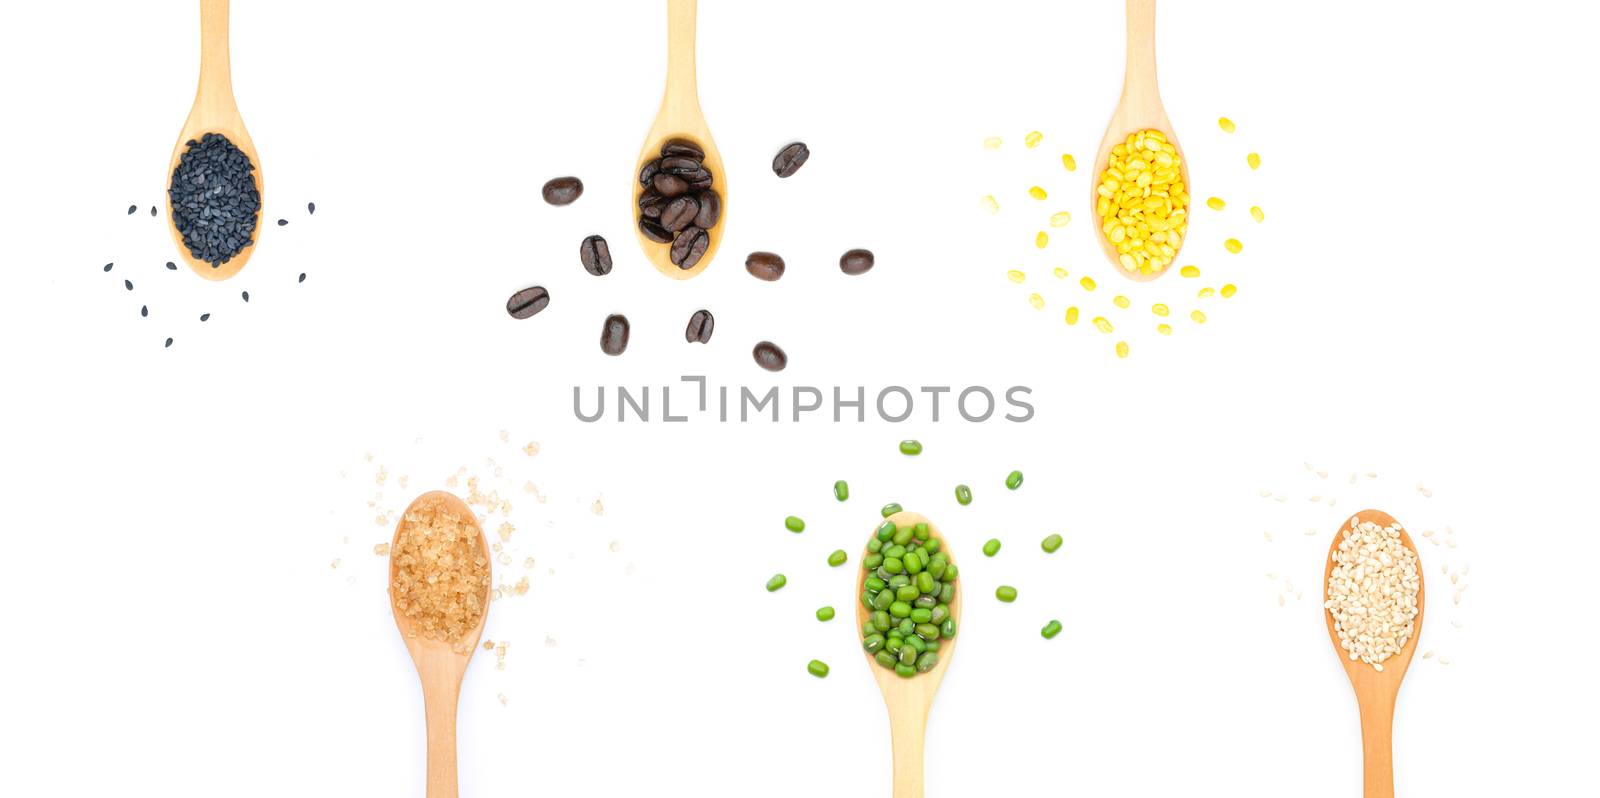 Coffee, Grains Mung bean, White and Black sesame seeds, Brown sugar in wooden scoop on white background